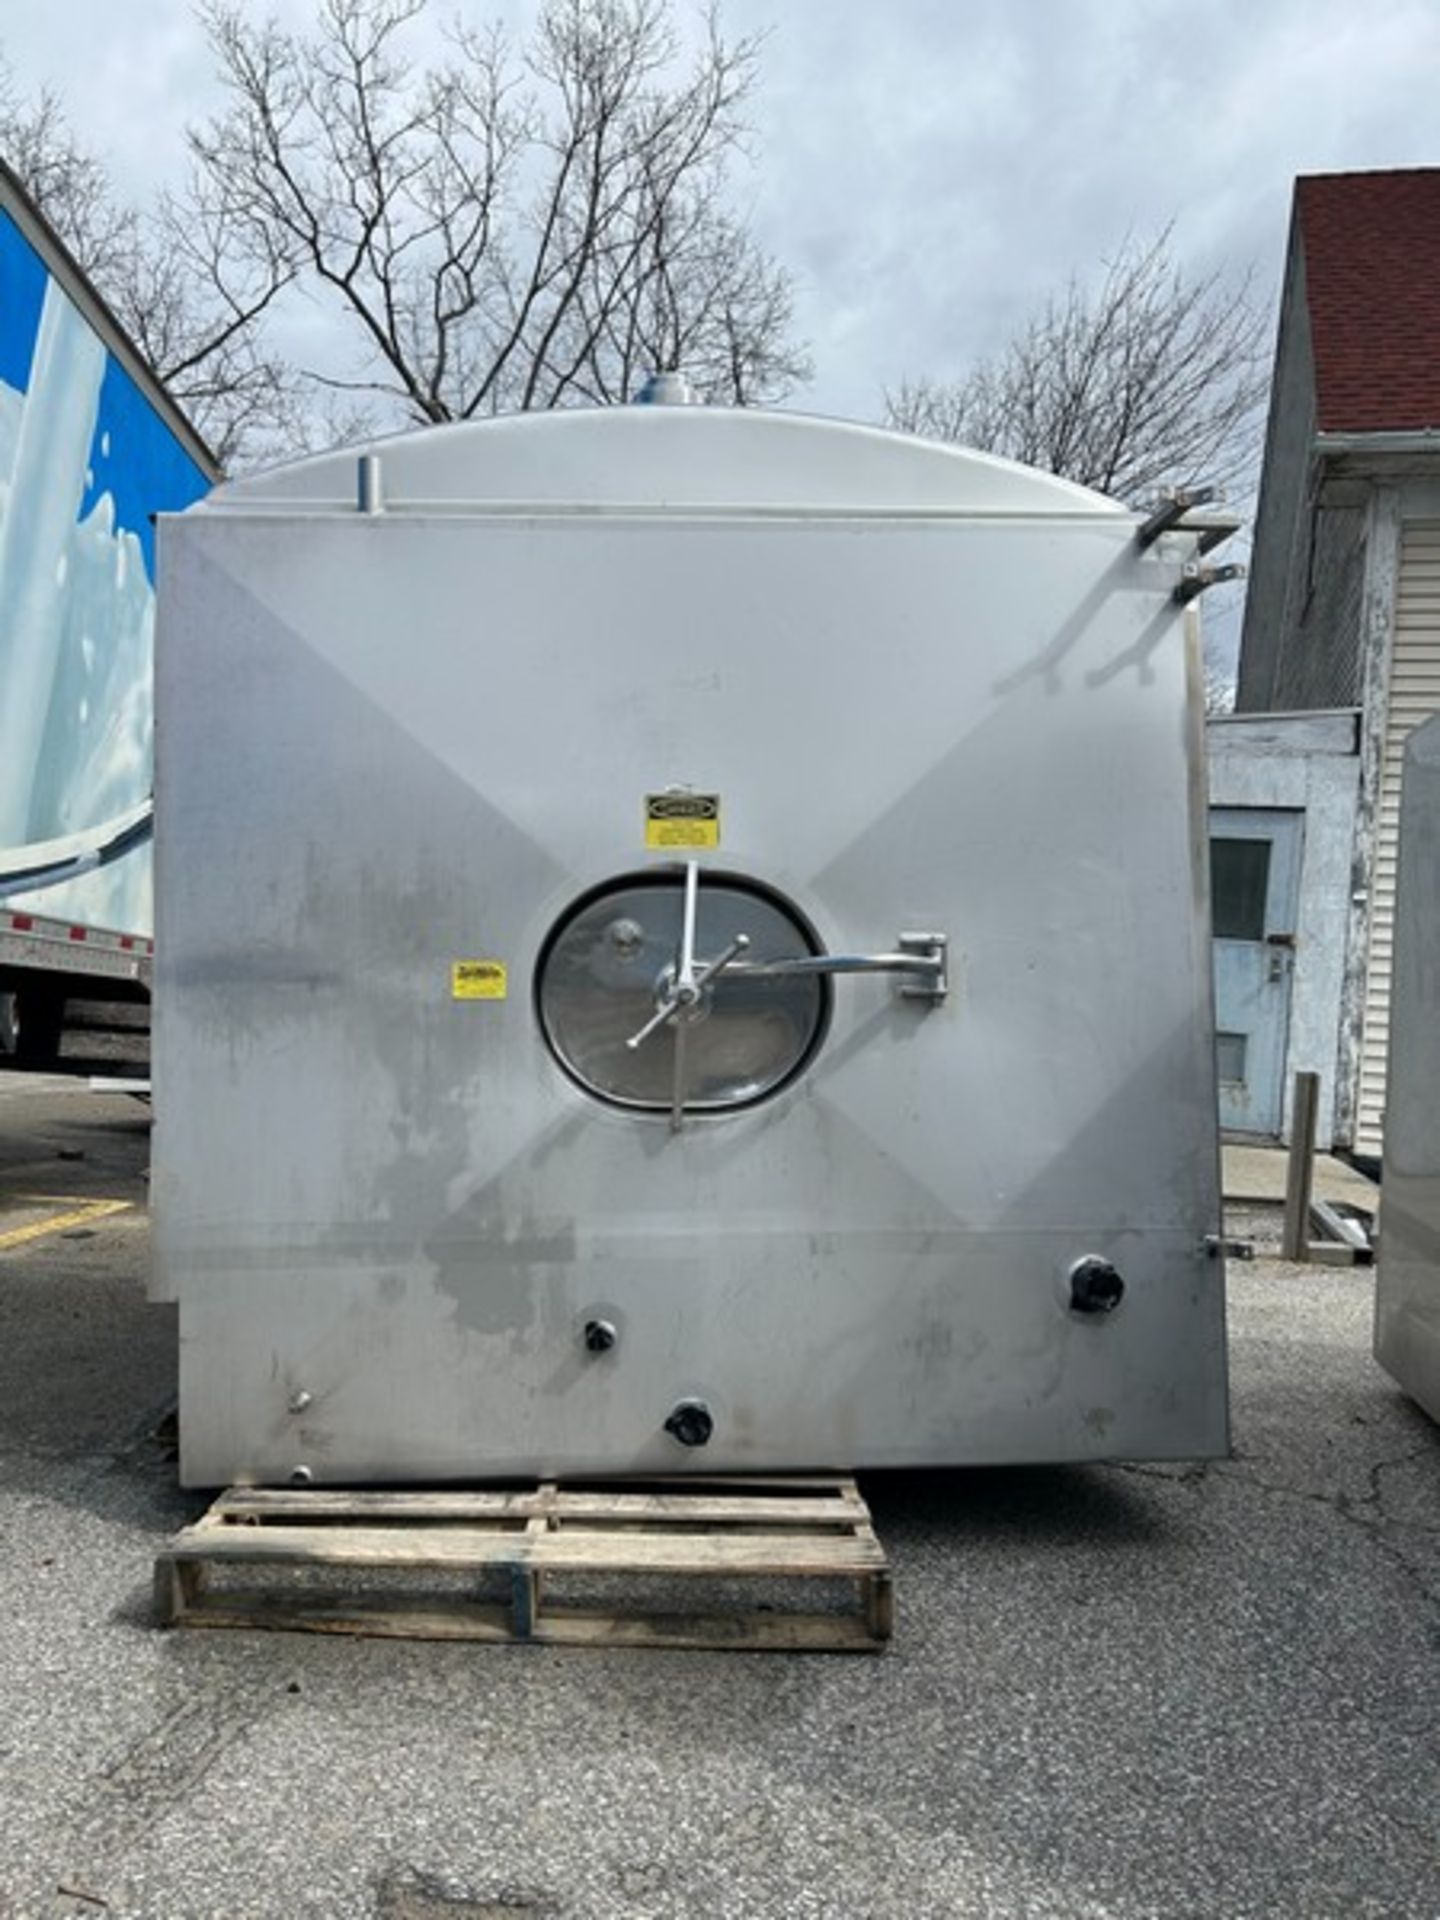 2500 gallon capacity insulated rectangular stainless steel blend tank. 1.5 HP 49 RPM vertical - Image 2 of 6